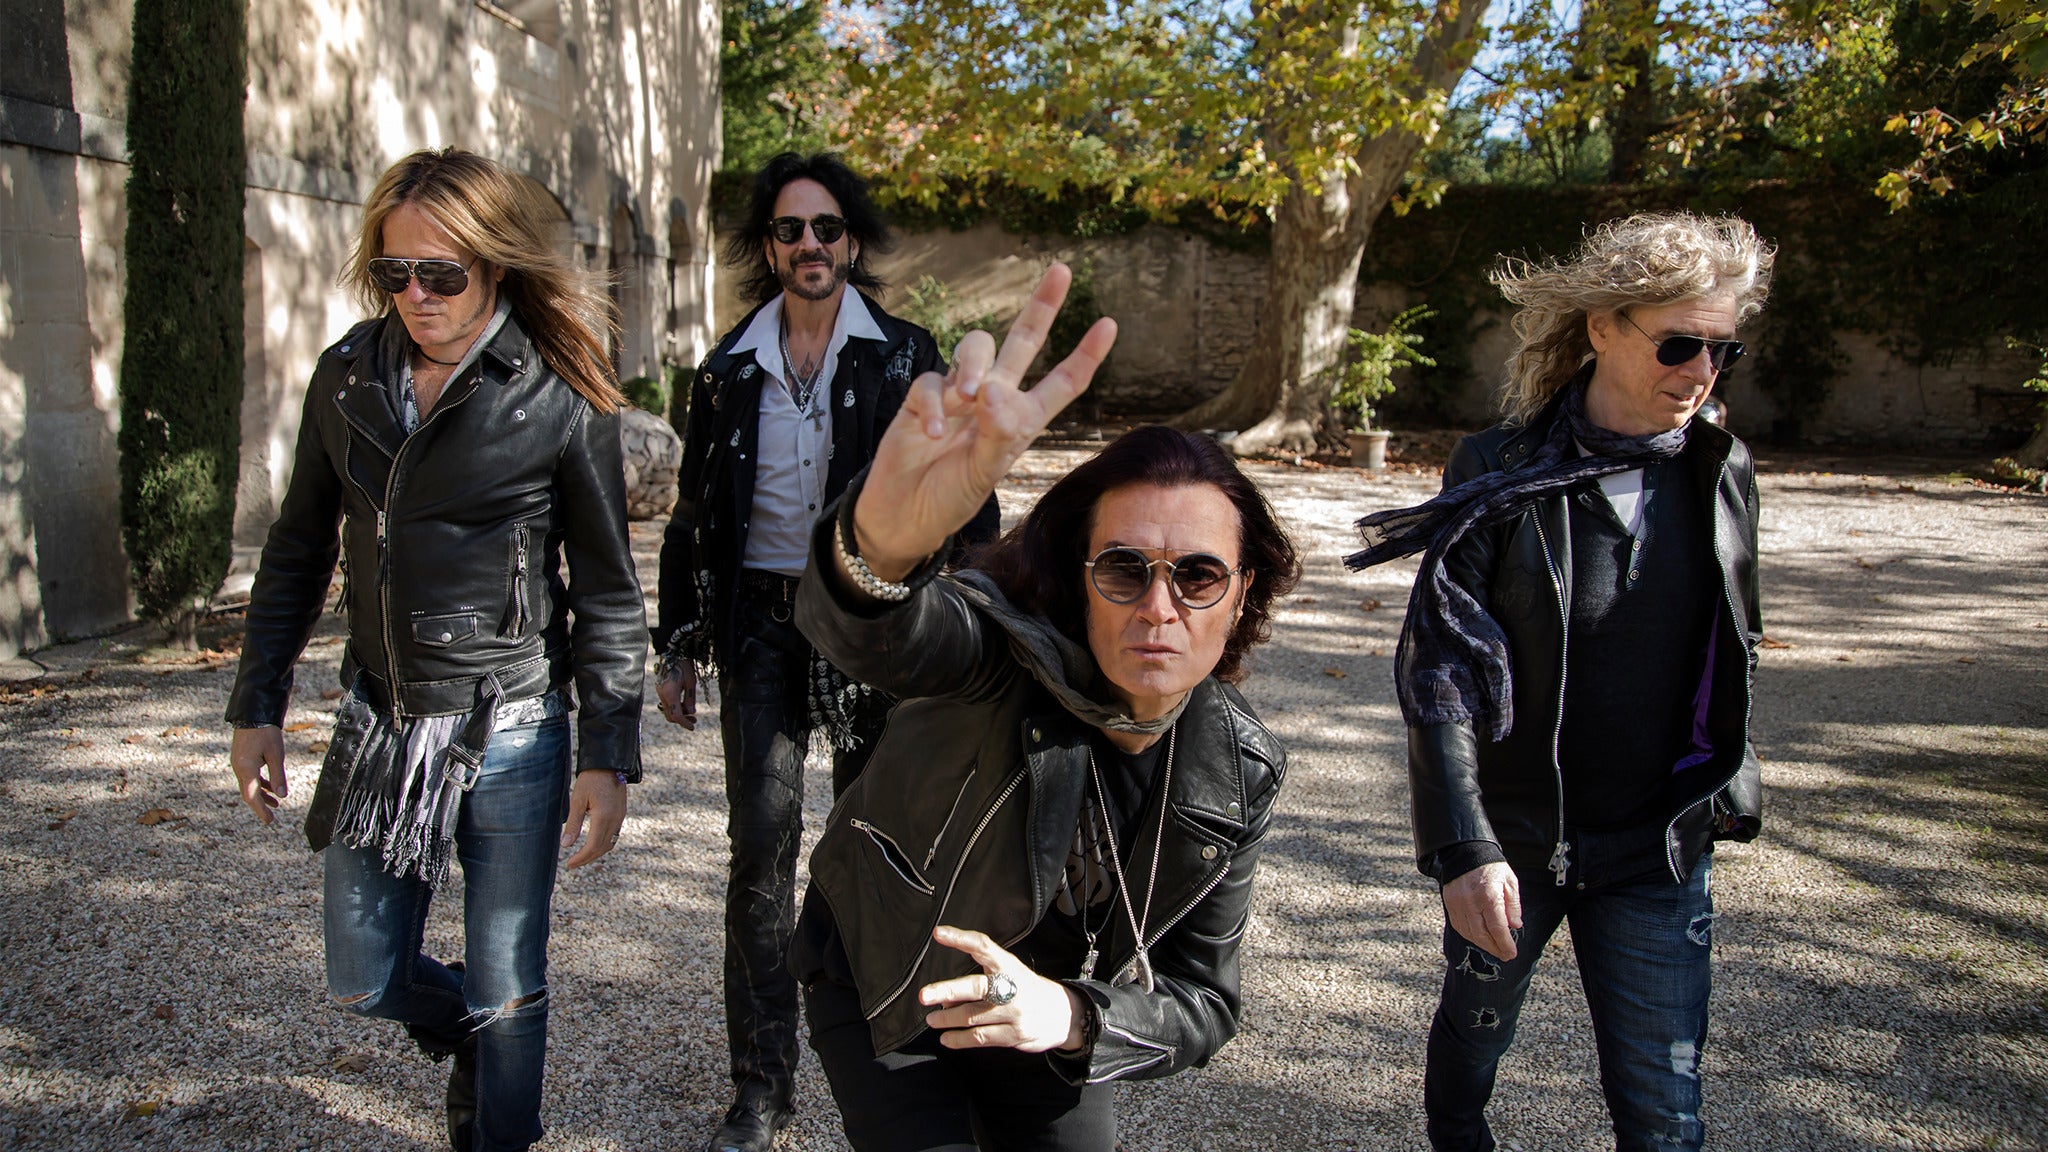 101.5 KGB Presents The Dead Daisies in San Diego promo photo for Live Nation presale offer code